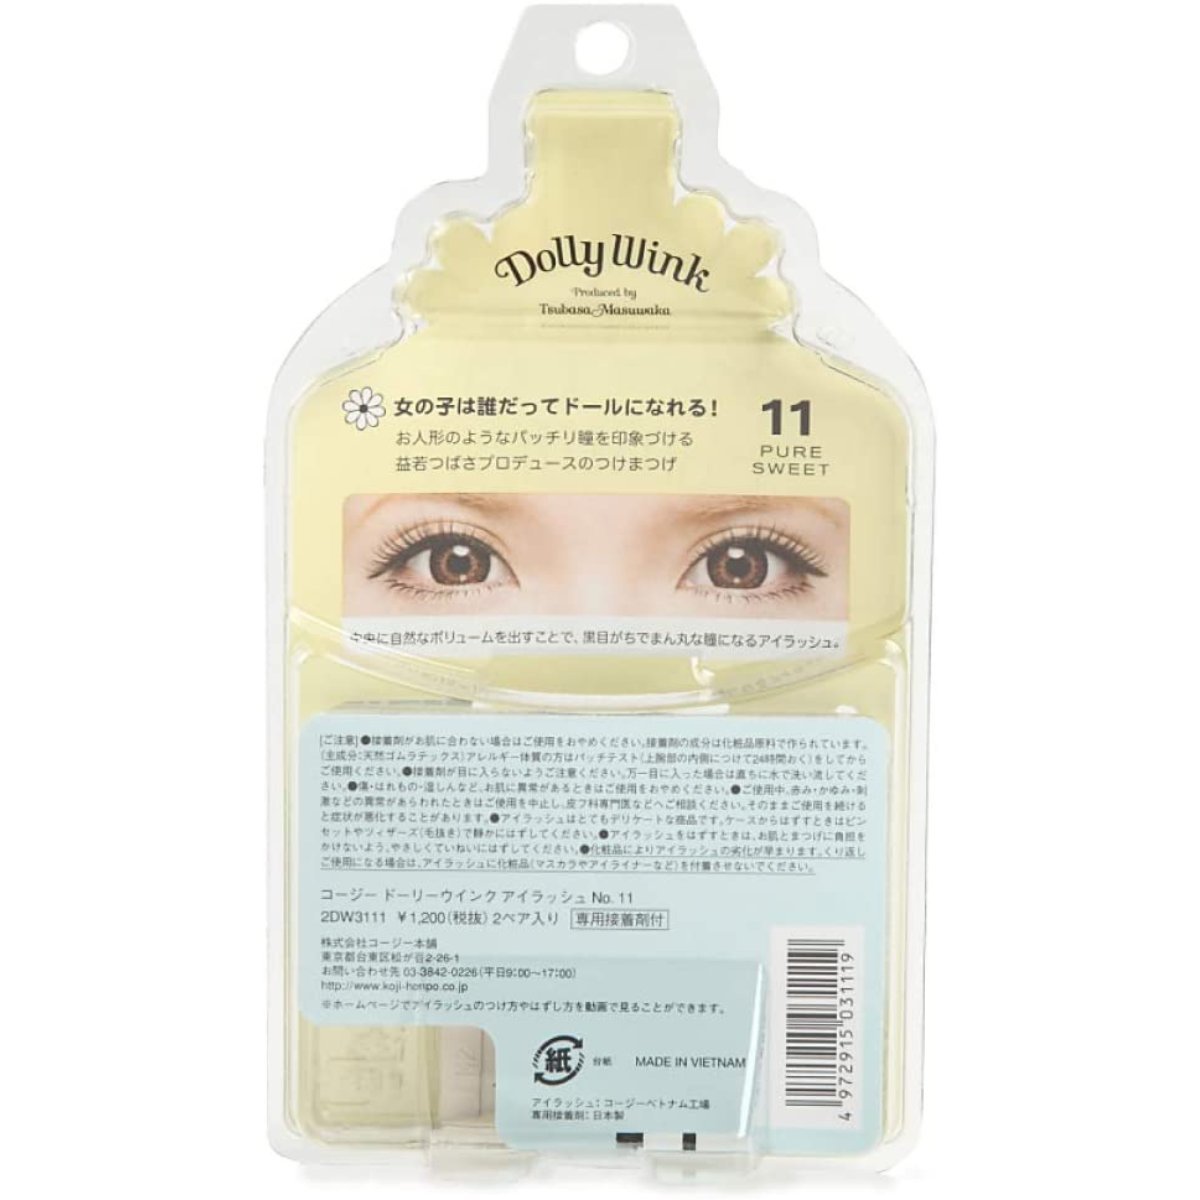  Dolly u ink No.11 PURE SWEET pure sweet on eyelashes for .....2 pair 